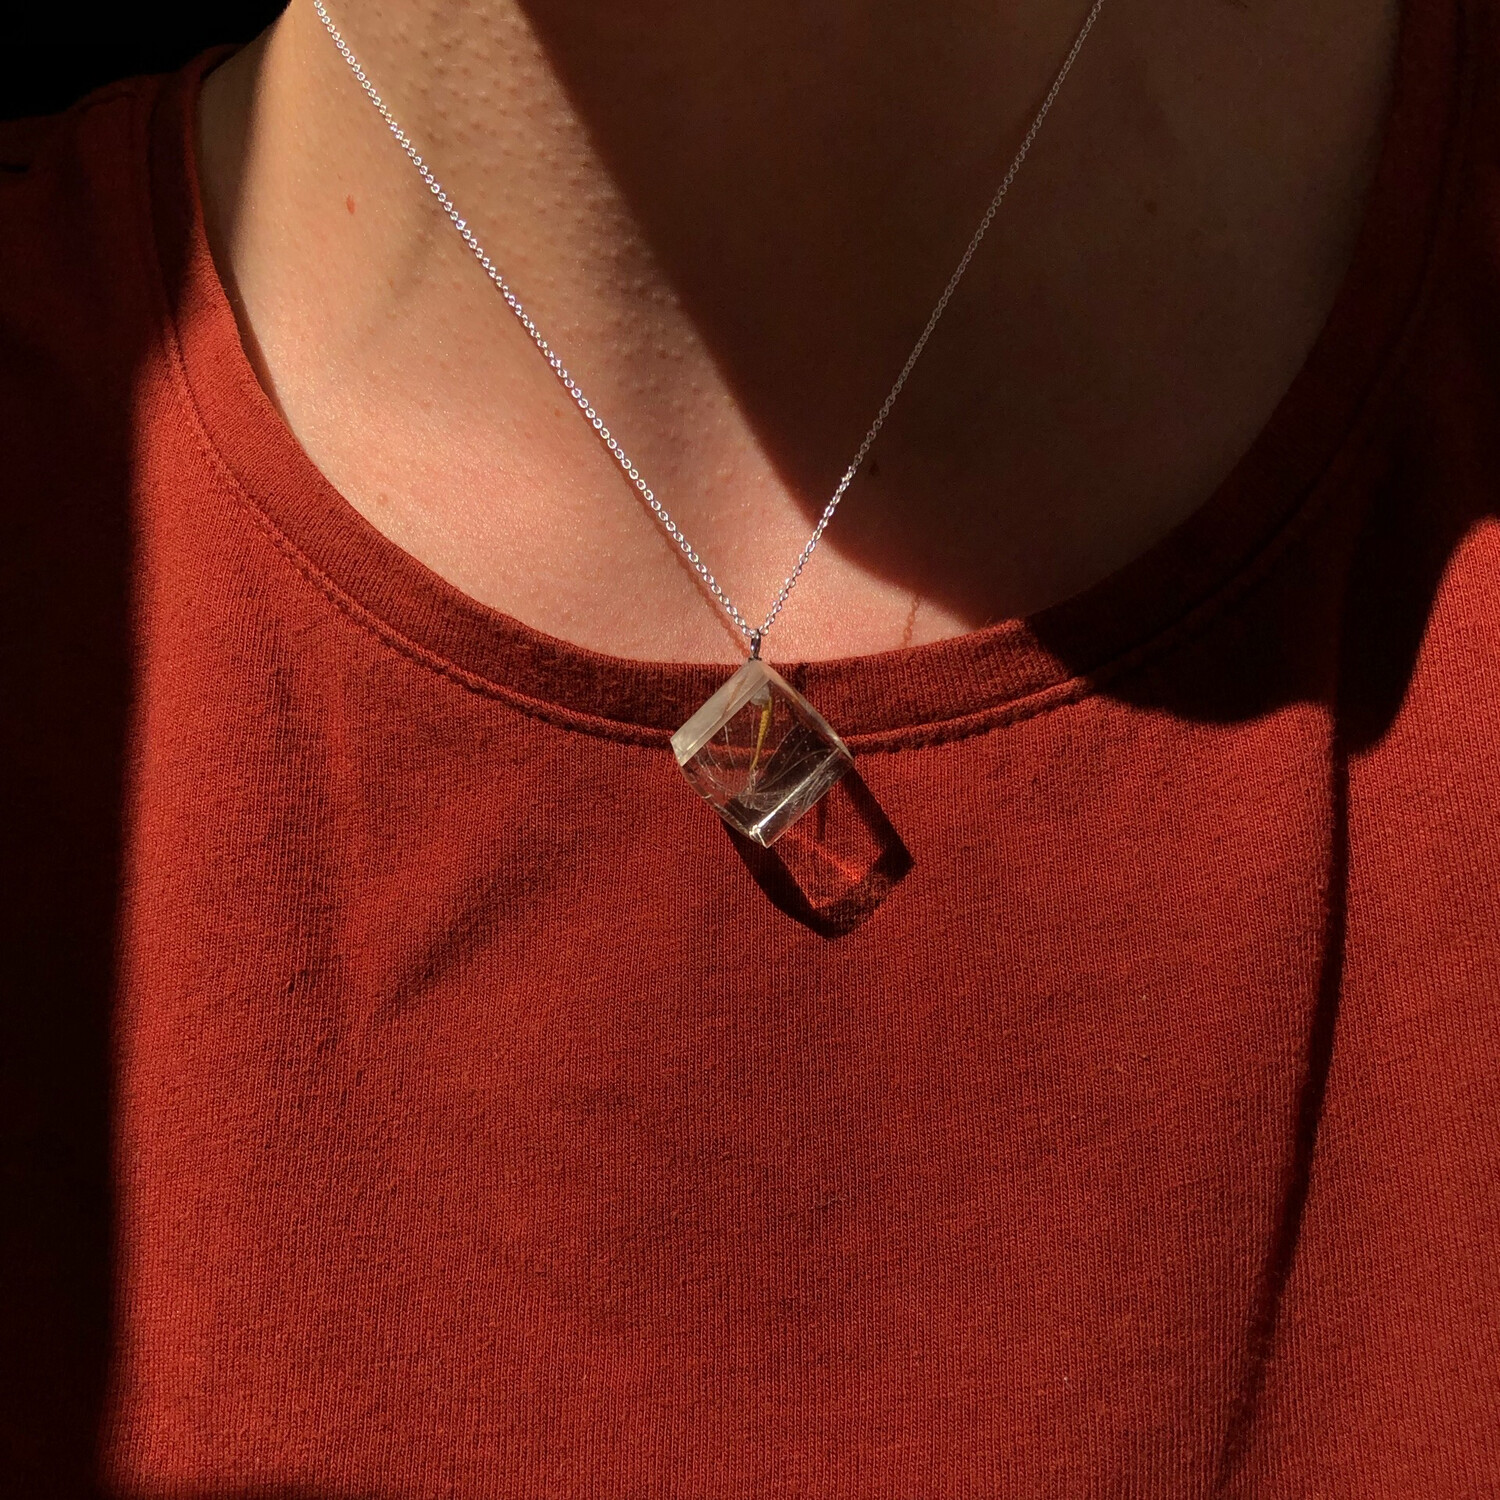 Dandelion Seed Cube Necklace